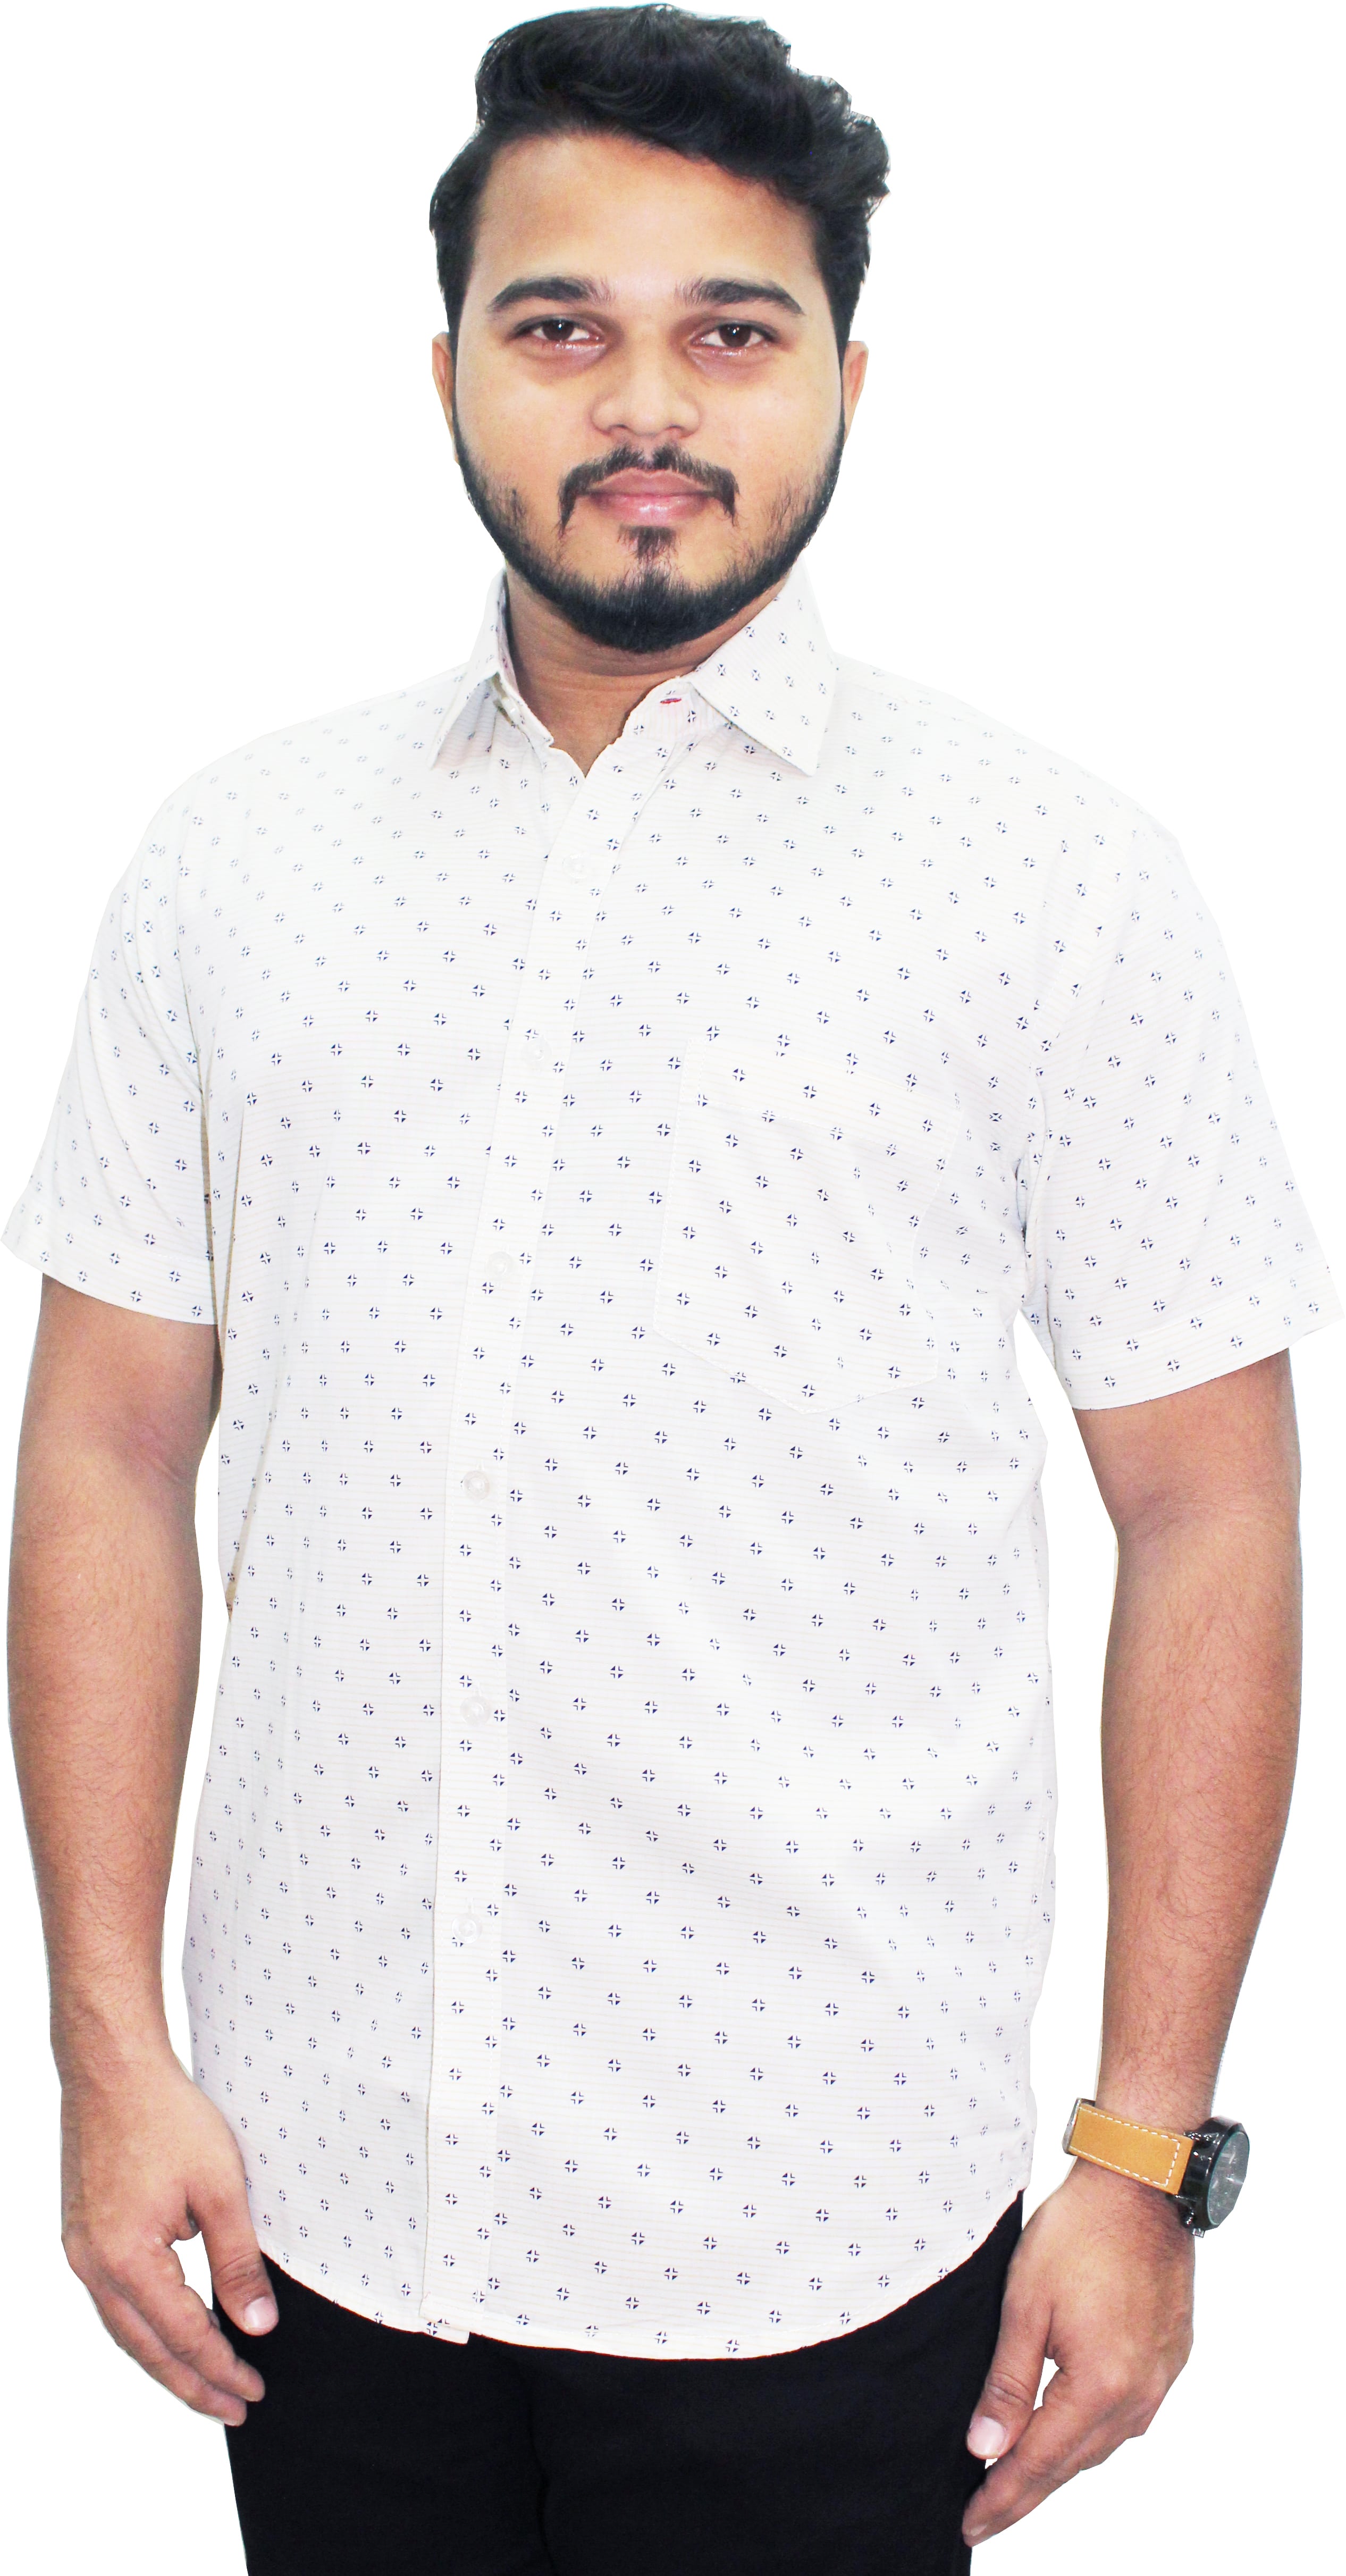 Buy SBCLHS219 - Southbay Men's White Printed Half Sleeve 100 Cotton ...